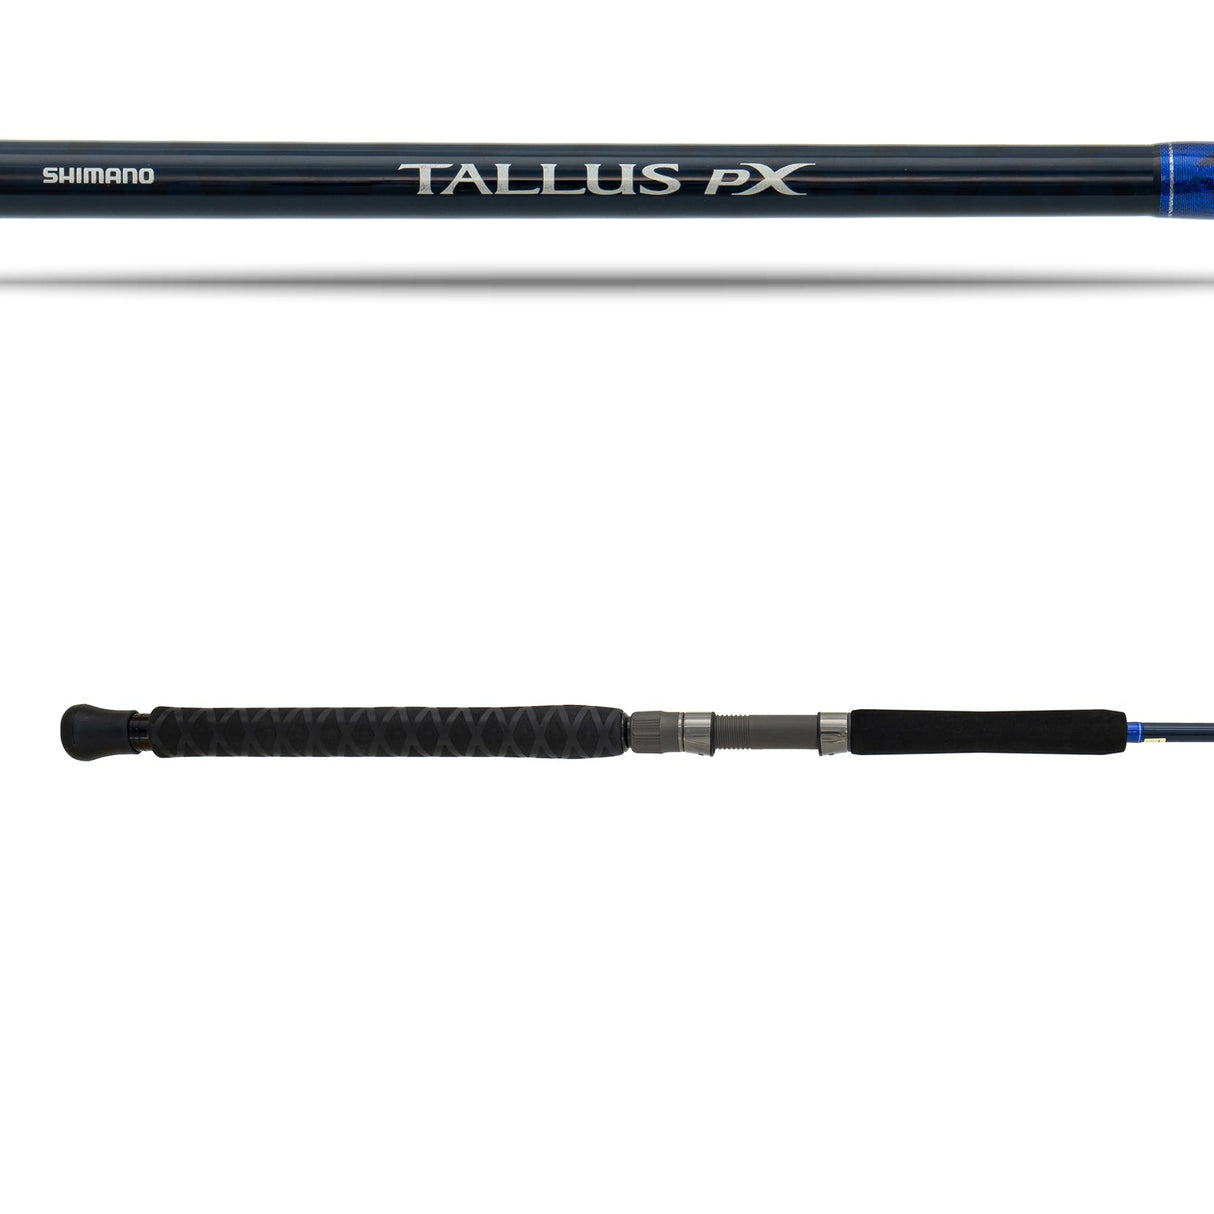 Shimano Tallus PX Spinning 72MH Rod